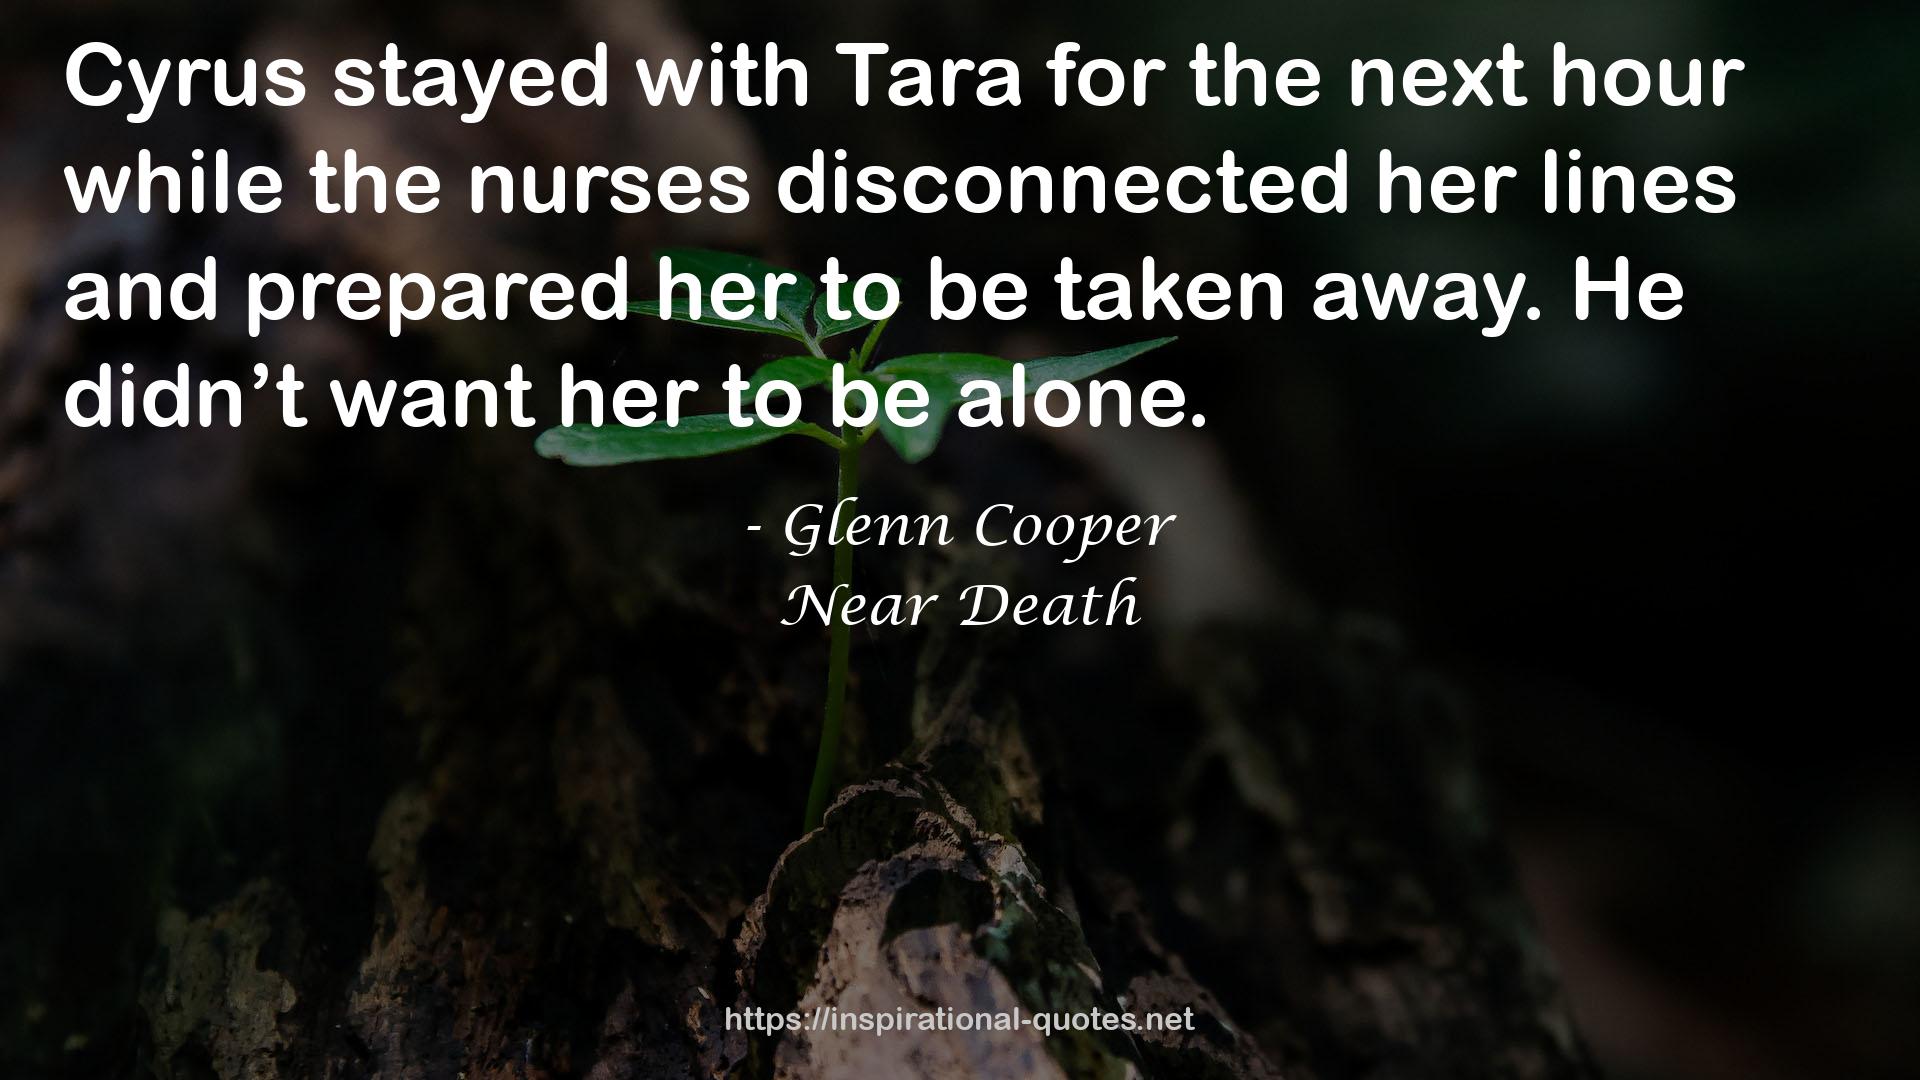 Near Death QUOTES